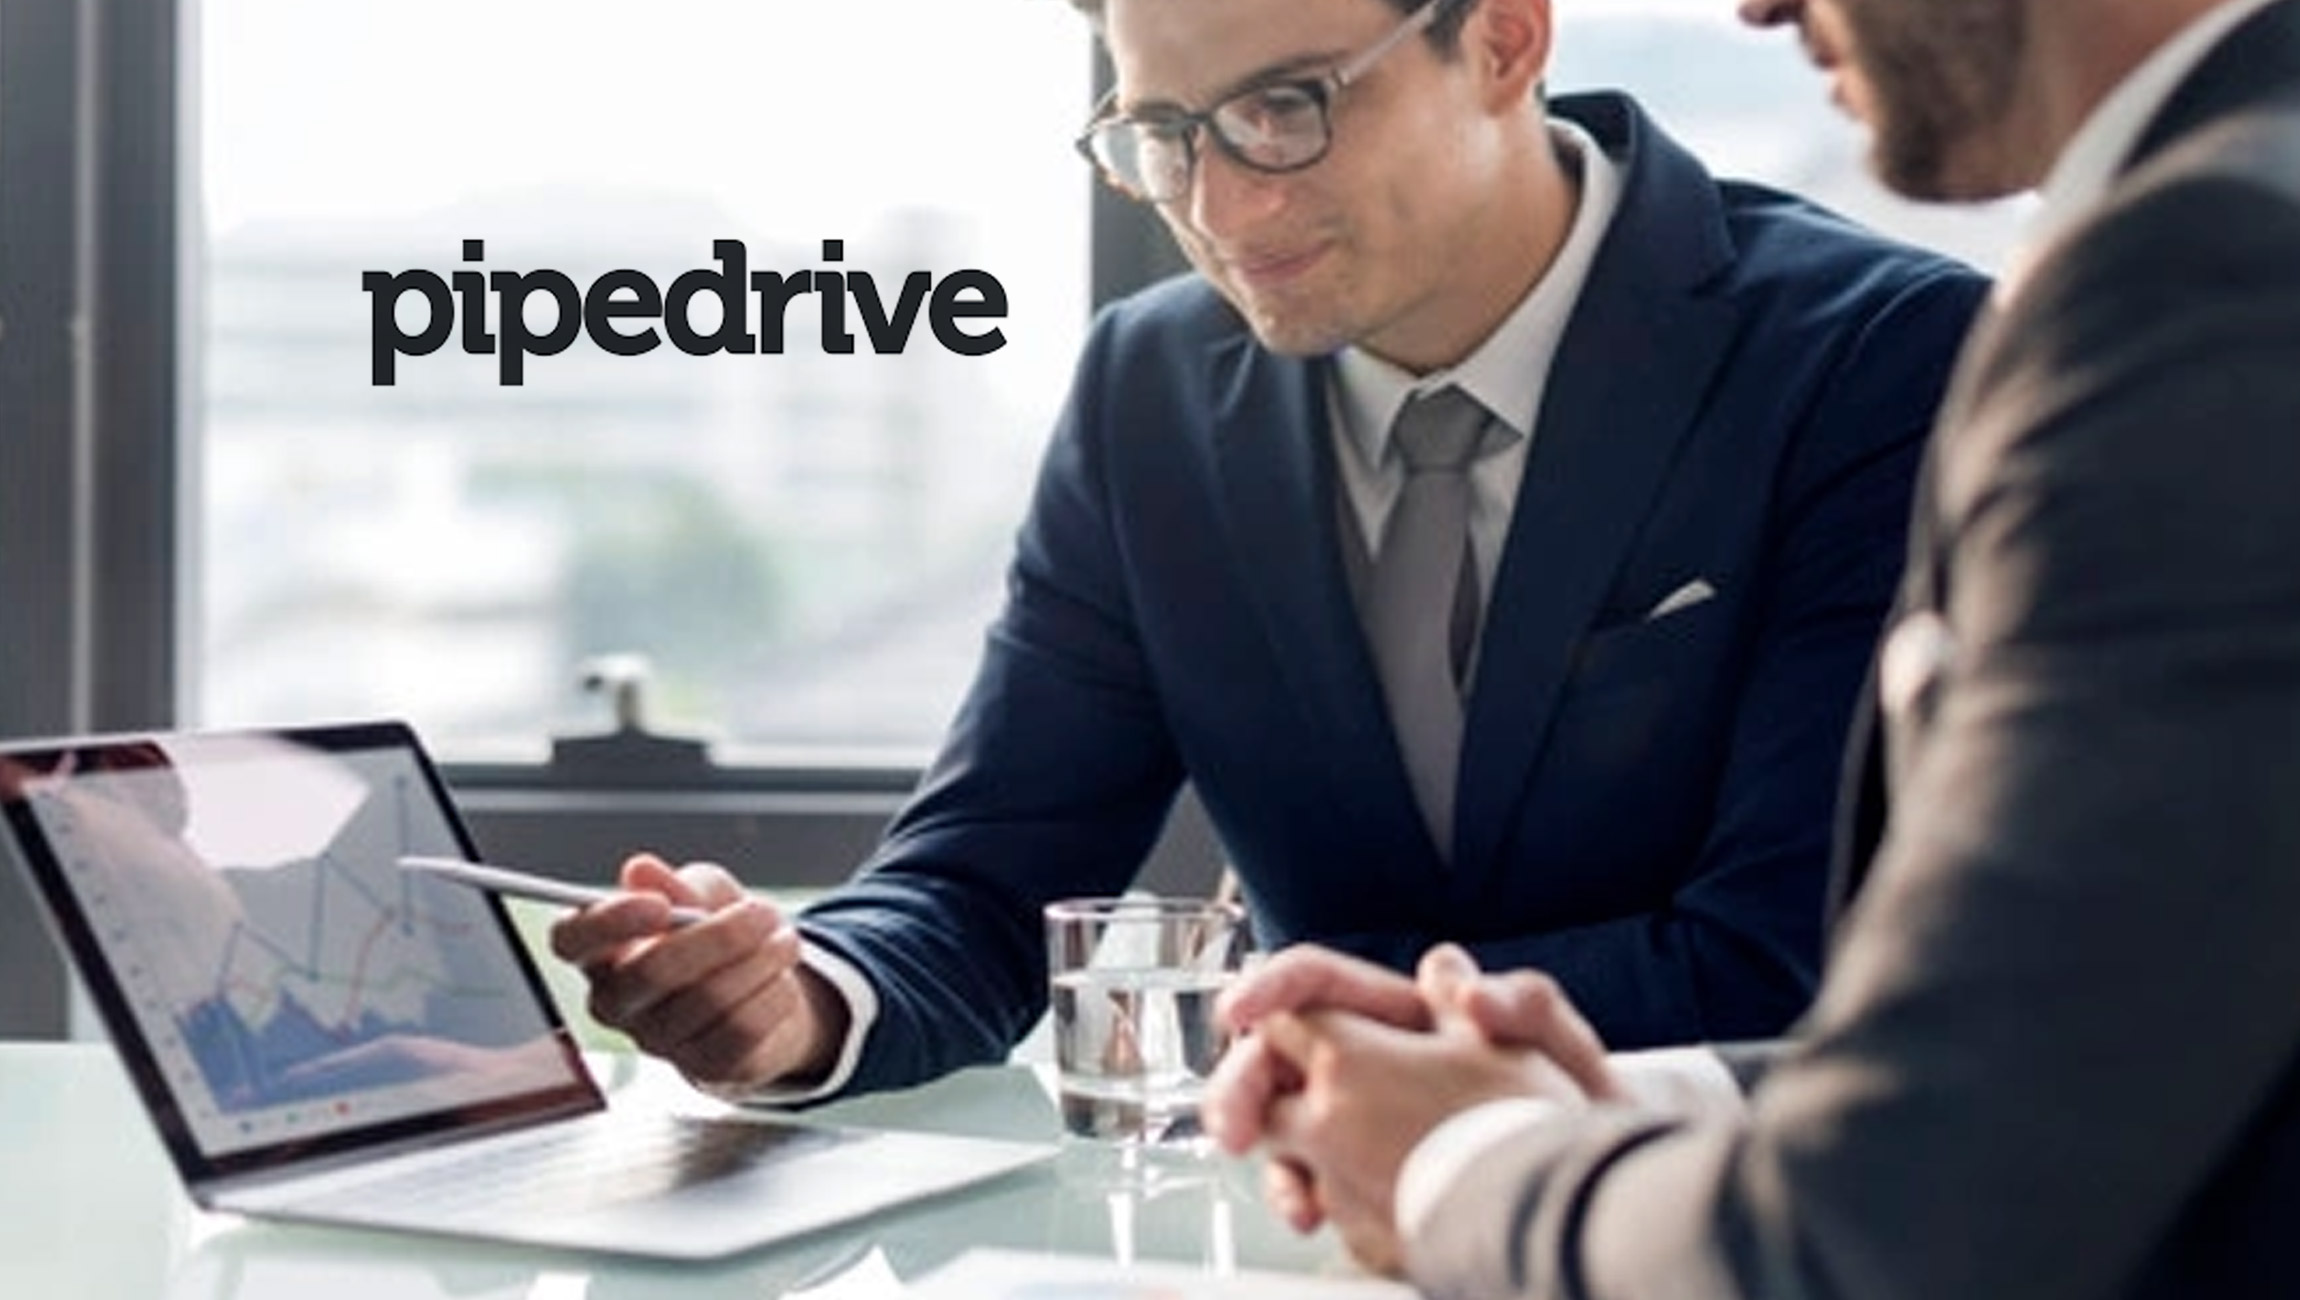 Pipedrive Named the “Easiest to Use” CRM by The Motley Fool